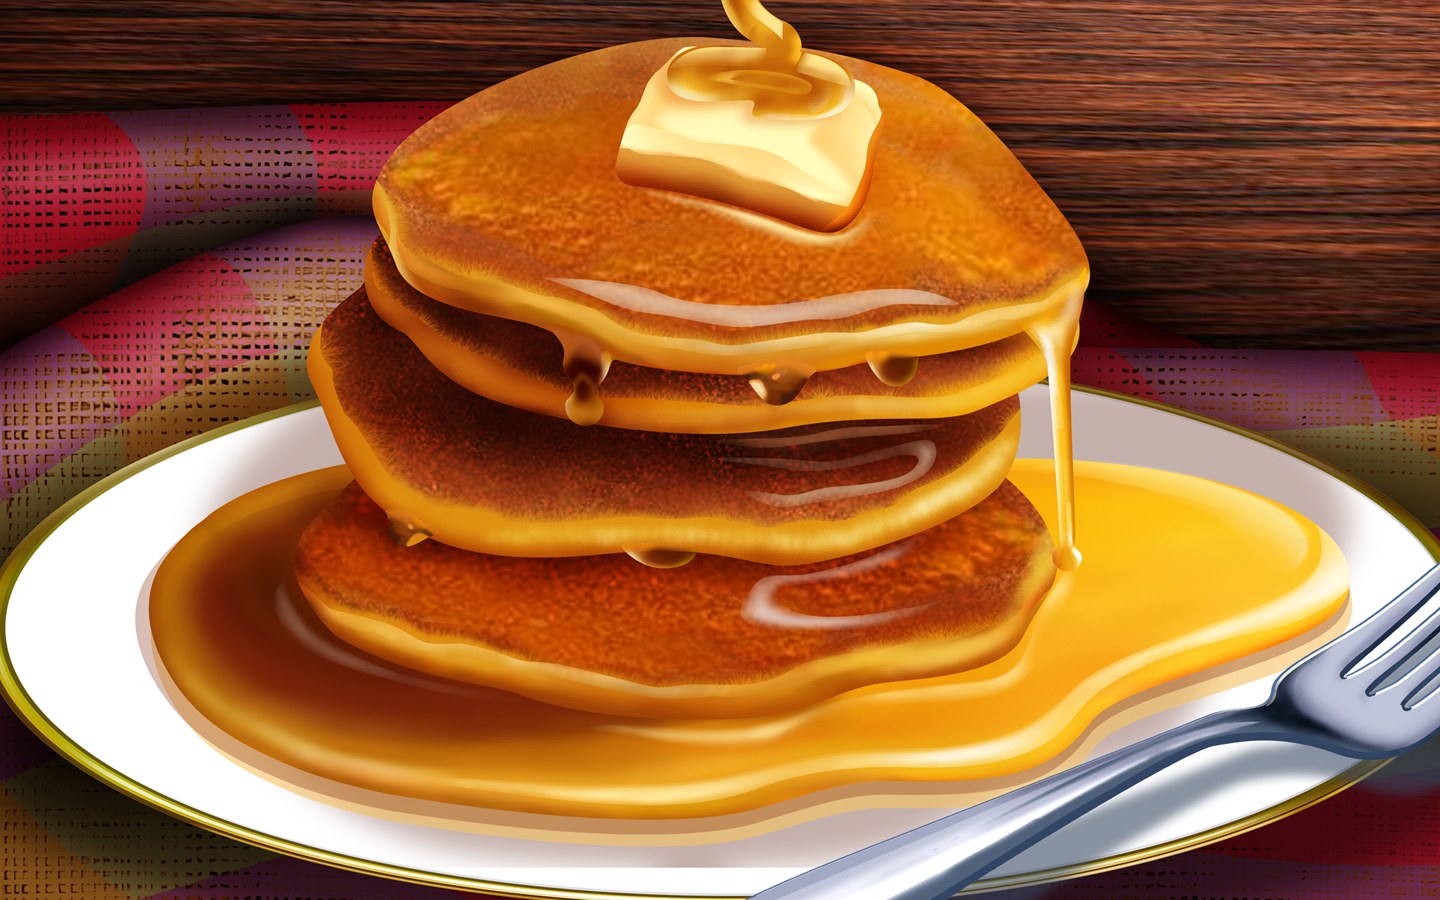 PSD_Food_illustrations_3190_pancakes_with_butter-1wi1tz5.jpg